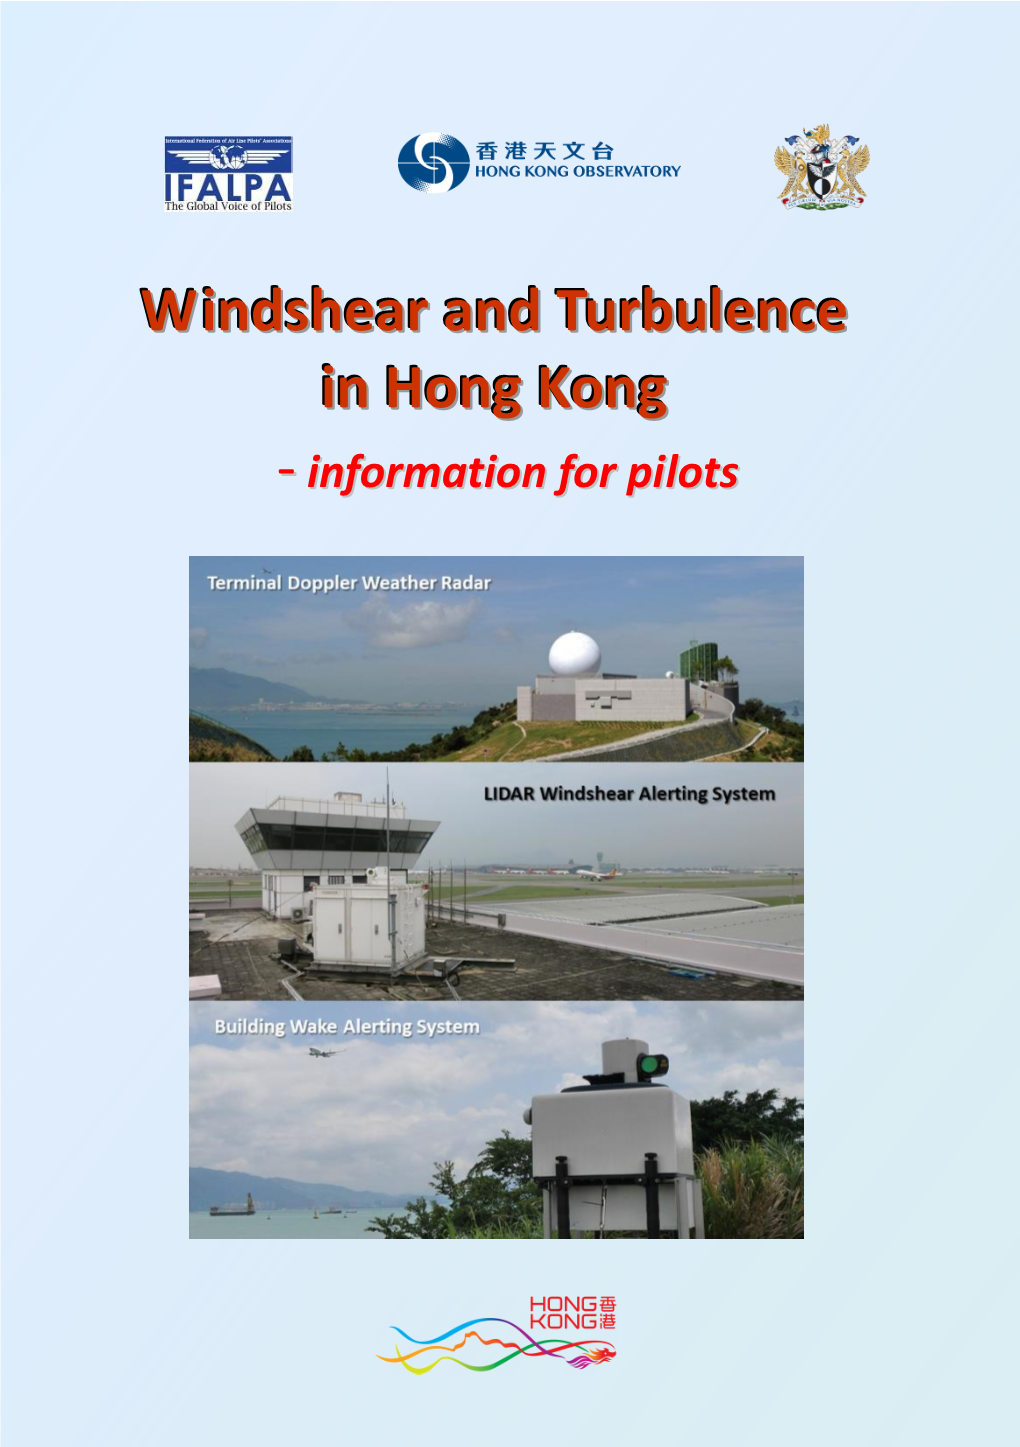 Windshear and Turbulence in Hong Kong, Based on Pilot Report Statistics, Are Listed Below in Decreasing Frequency of Occurrence